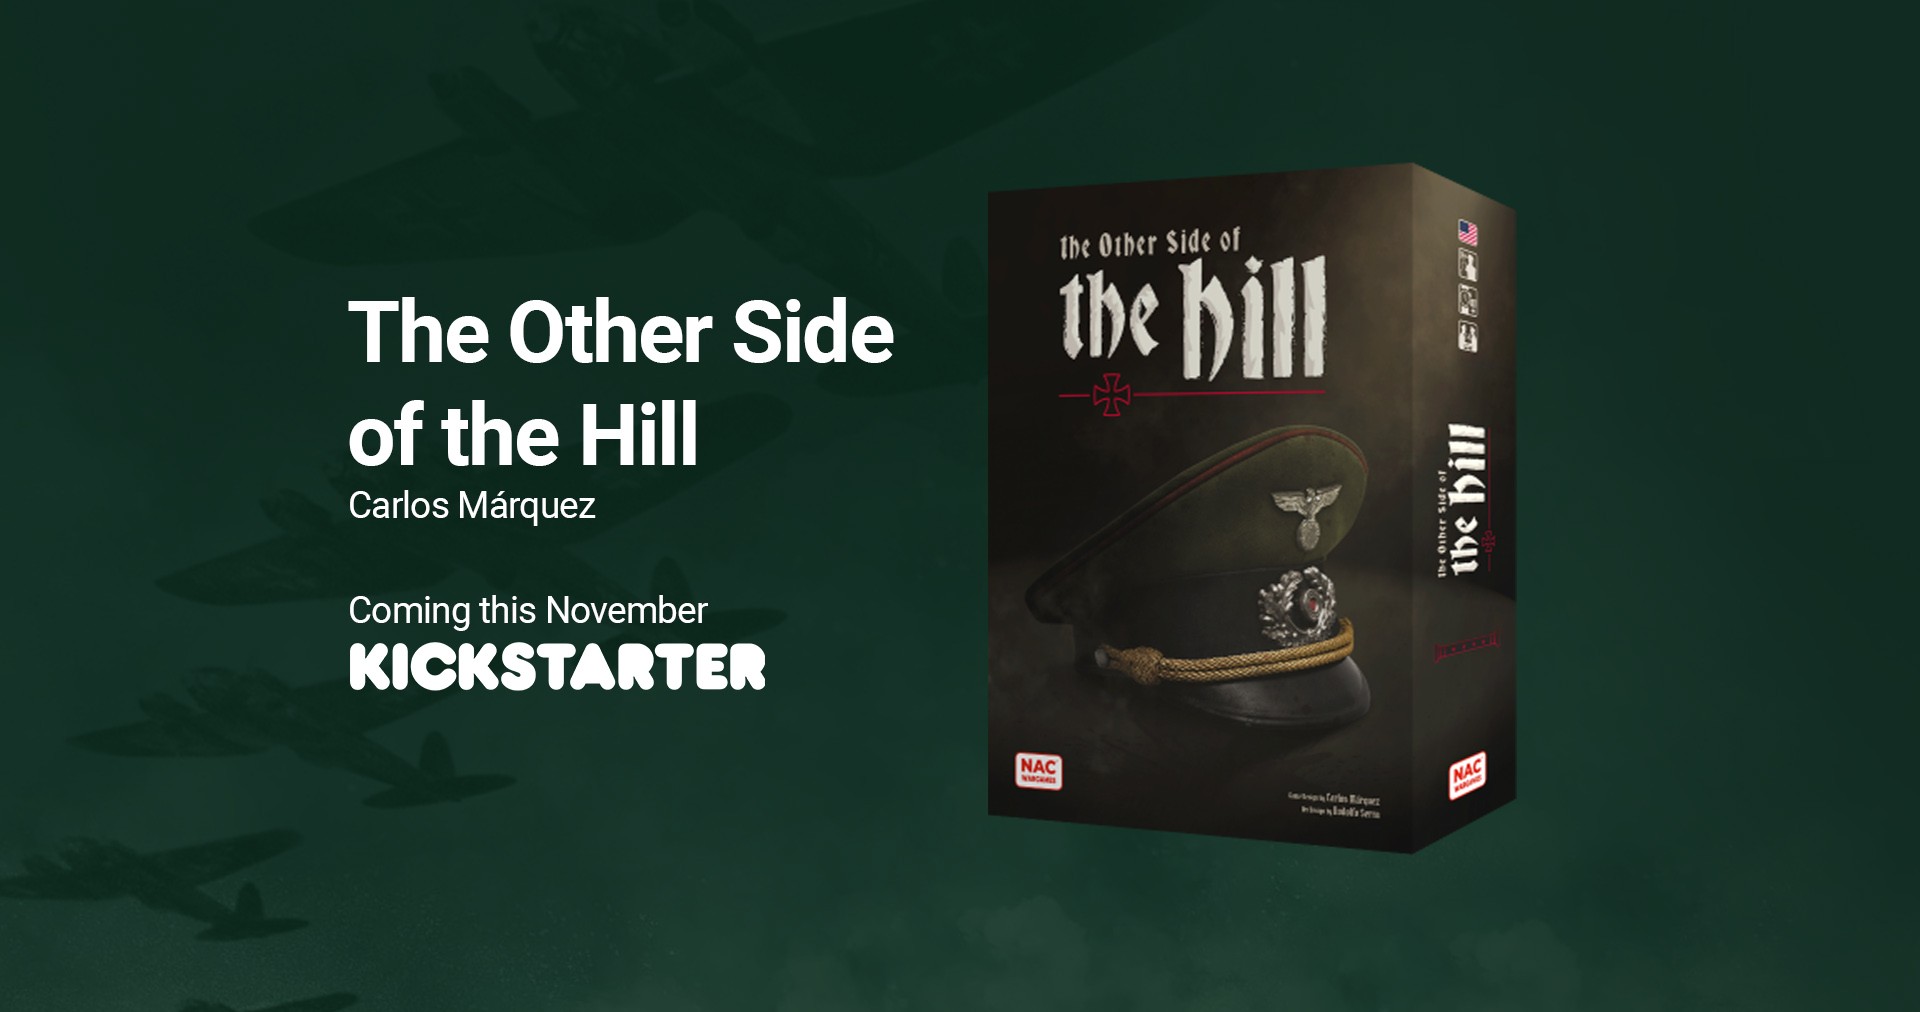 The Other Side of the Hill